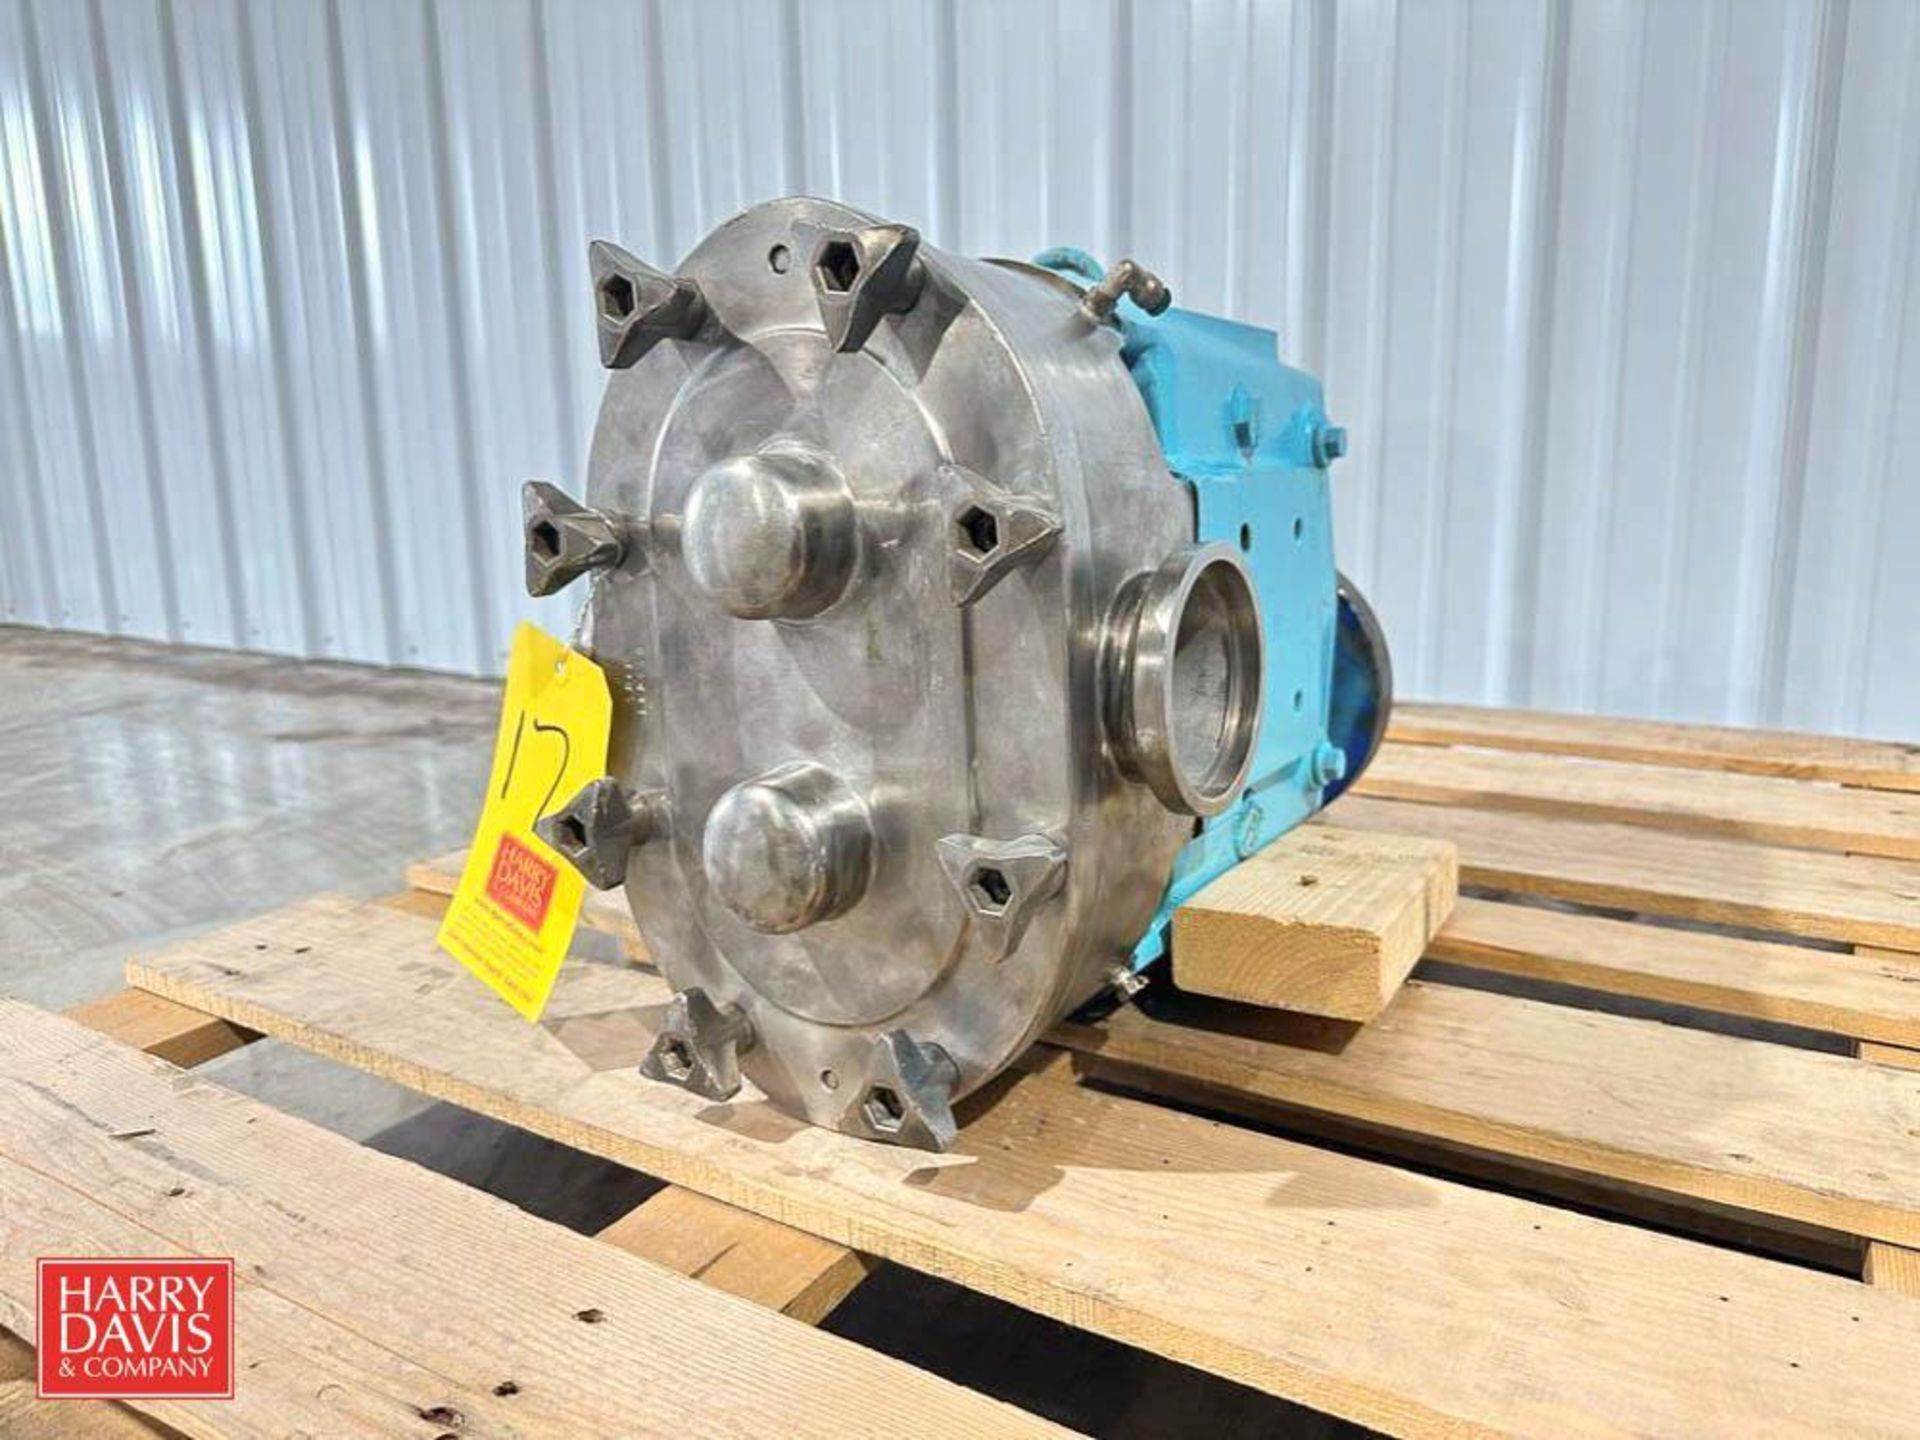 Waukesha Positive Displacement Pump Head: Size: 320 - Rigging Fee: $200